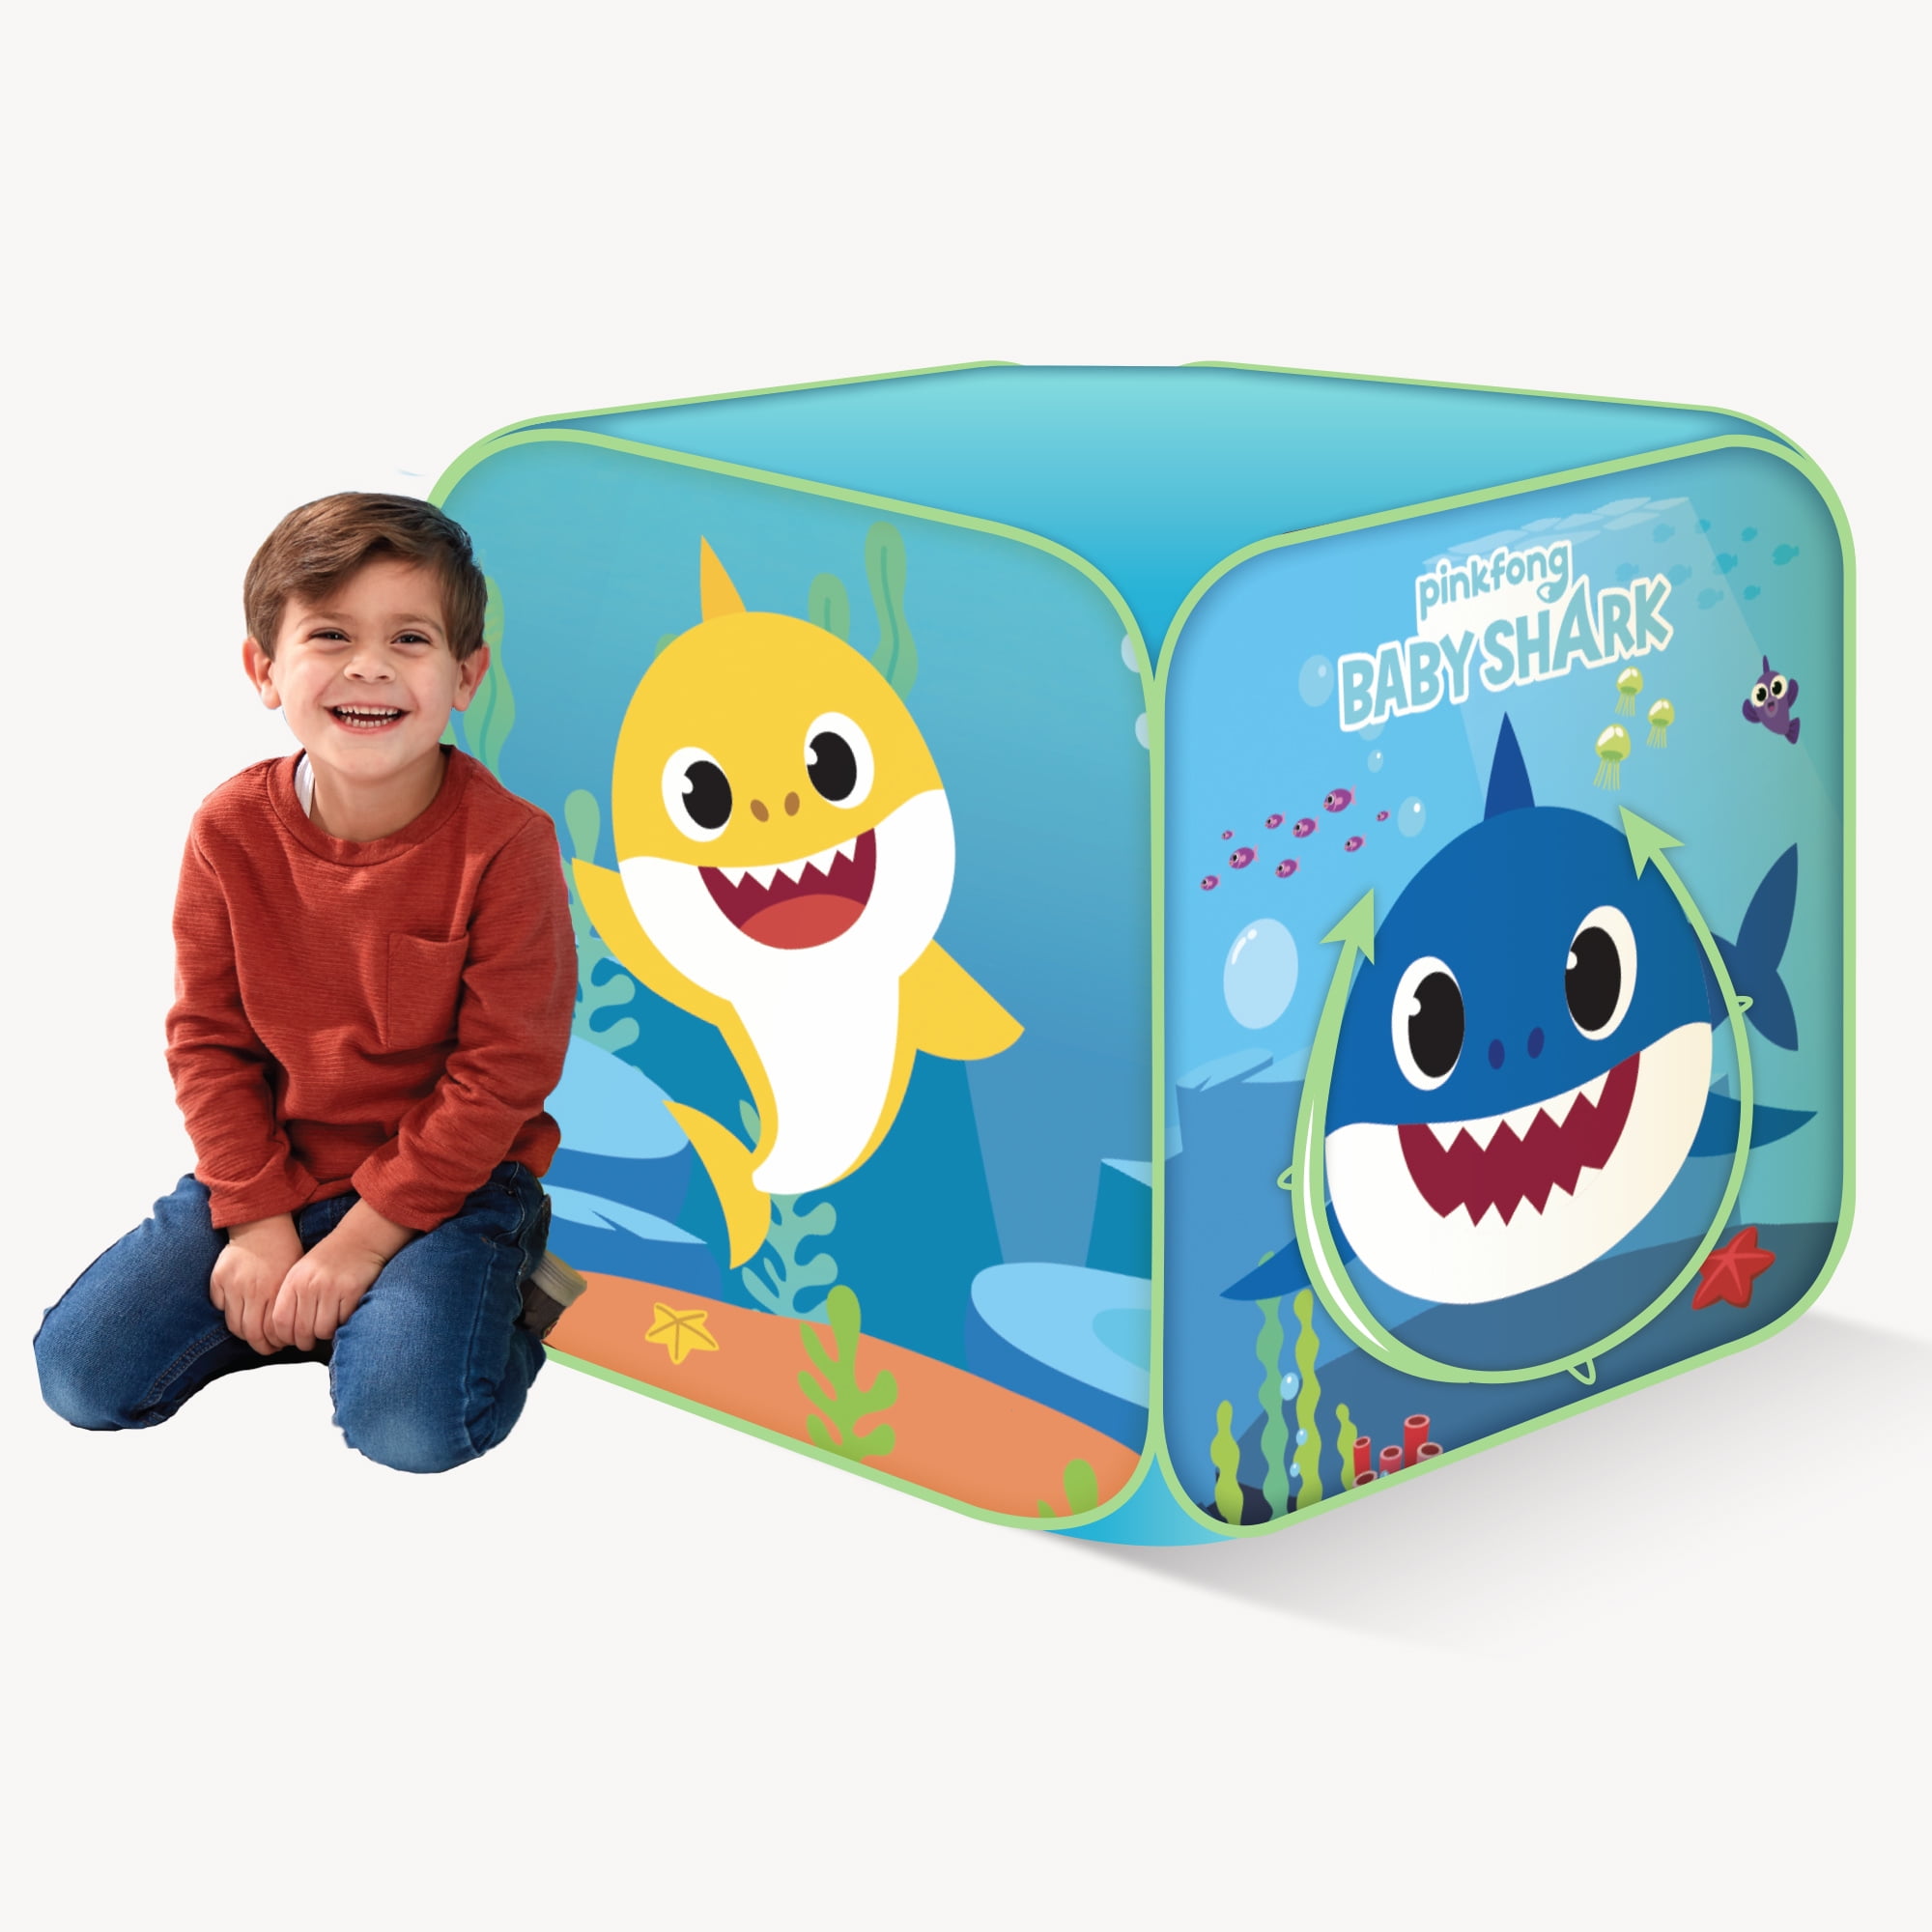 Pinkfong Baby Shark Tent Foldable Kids Pop up Classic Cube Play House for sale online 